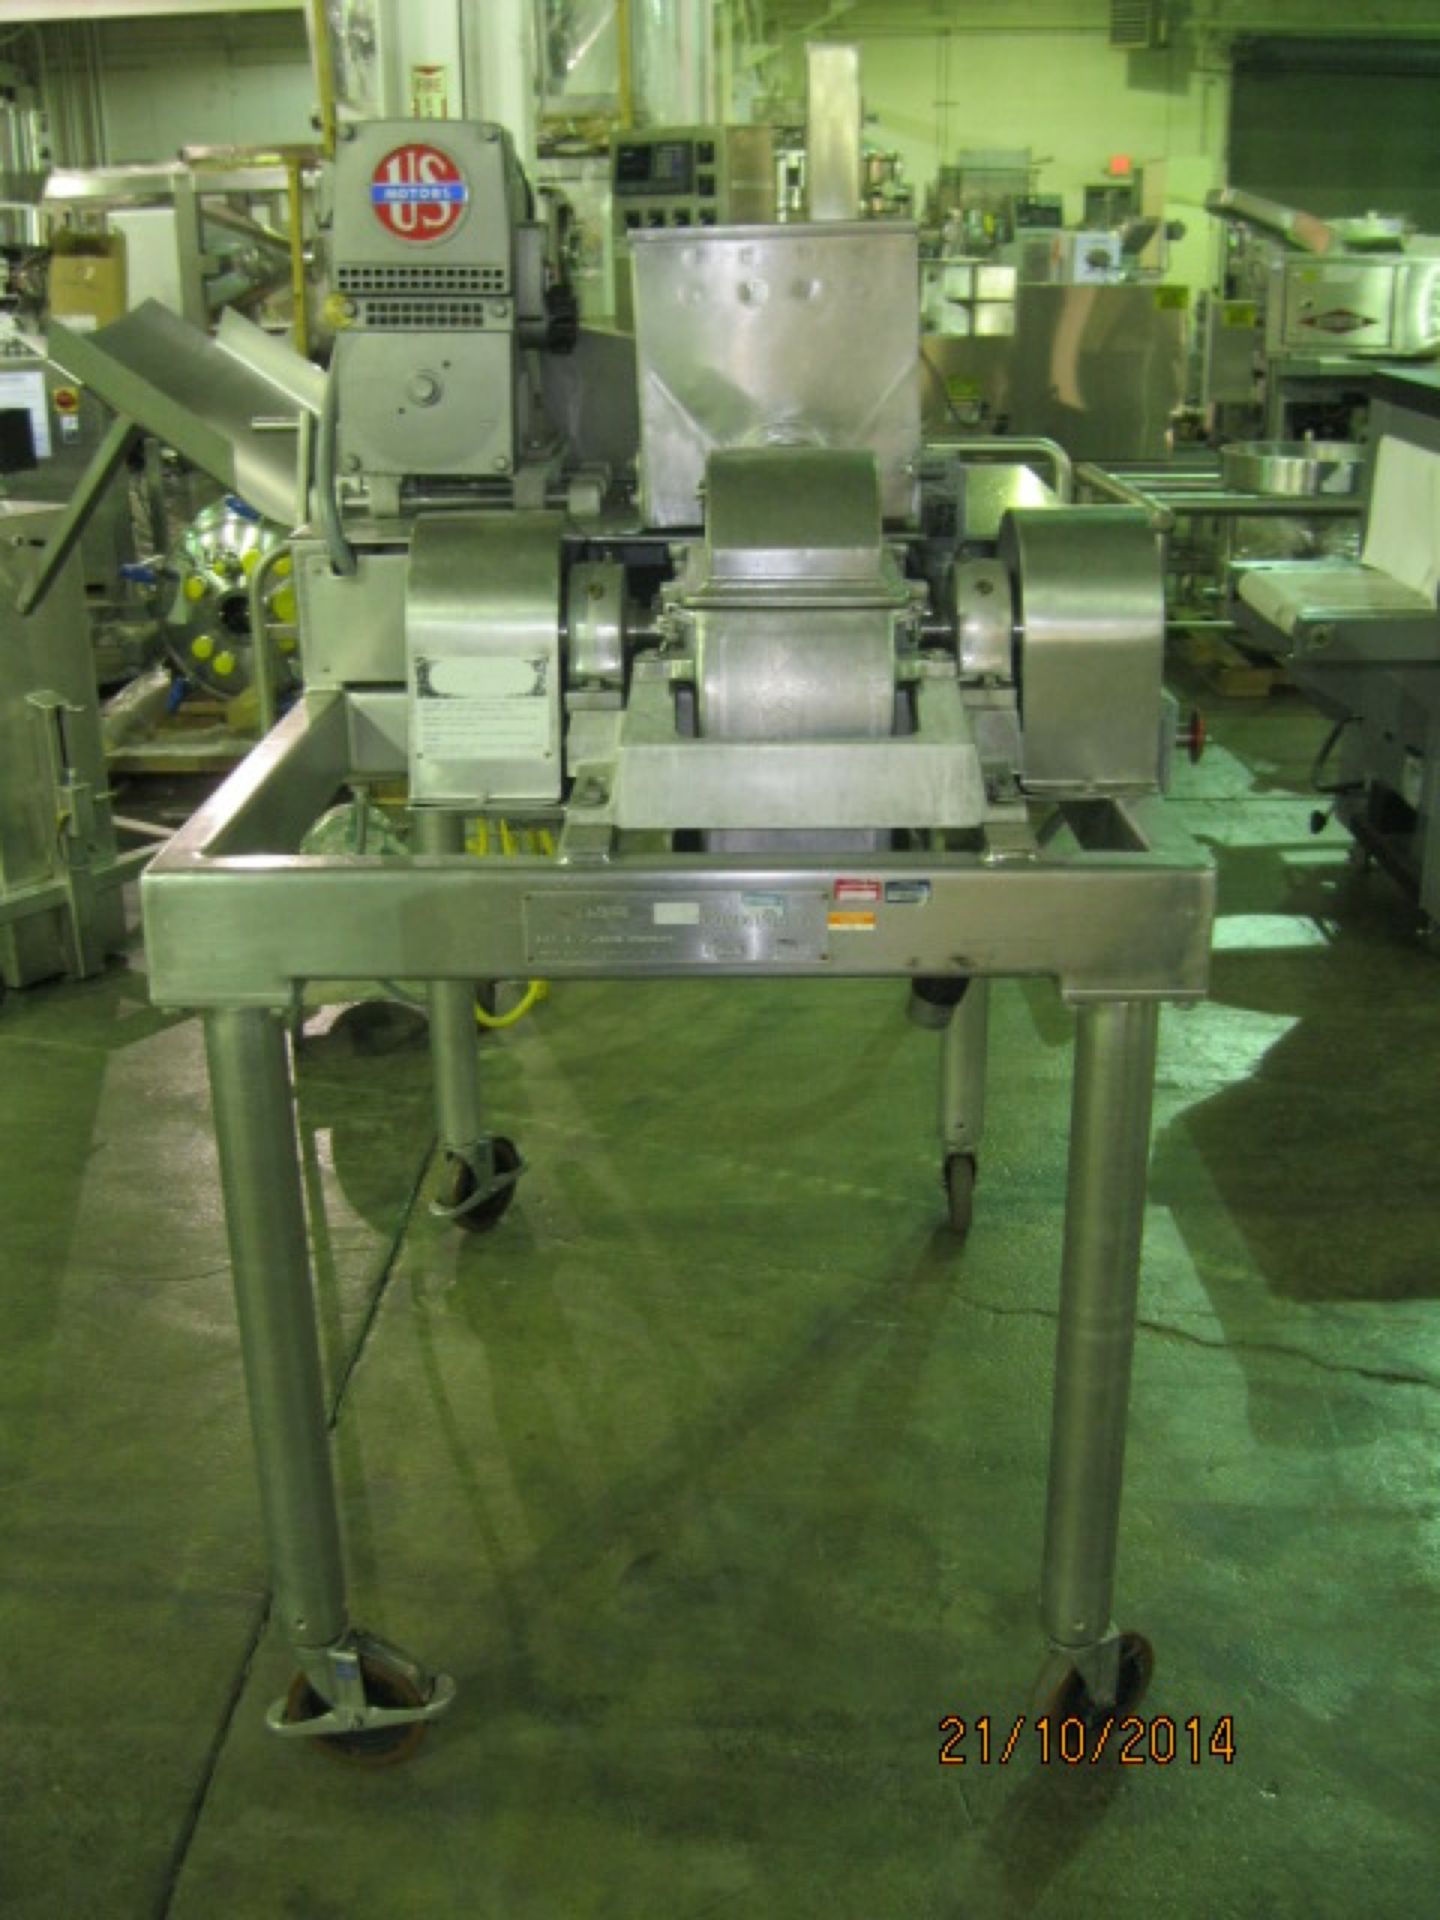 DASO6 Fitzmill, stainless steel construction, screw feed, fixed knive rotor, serial# 8338.